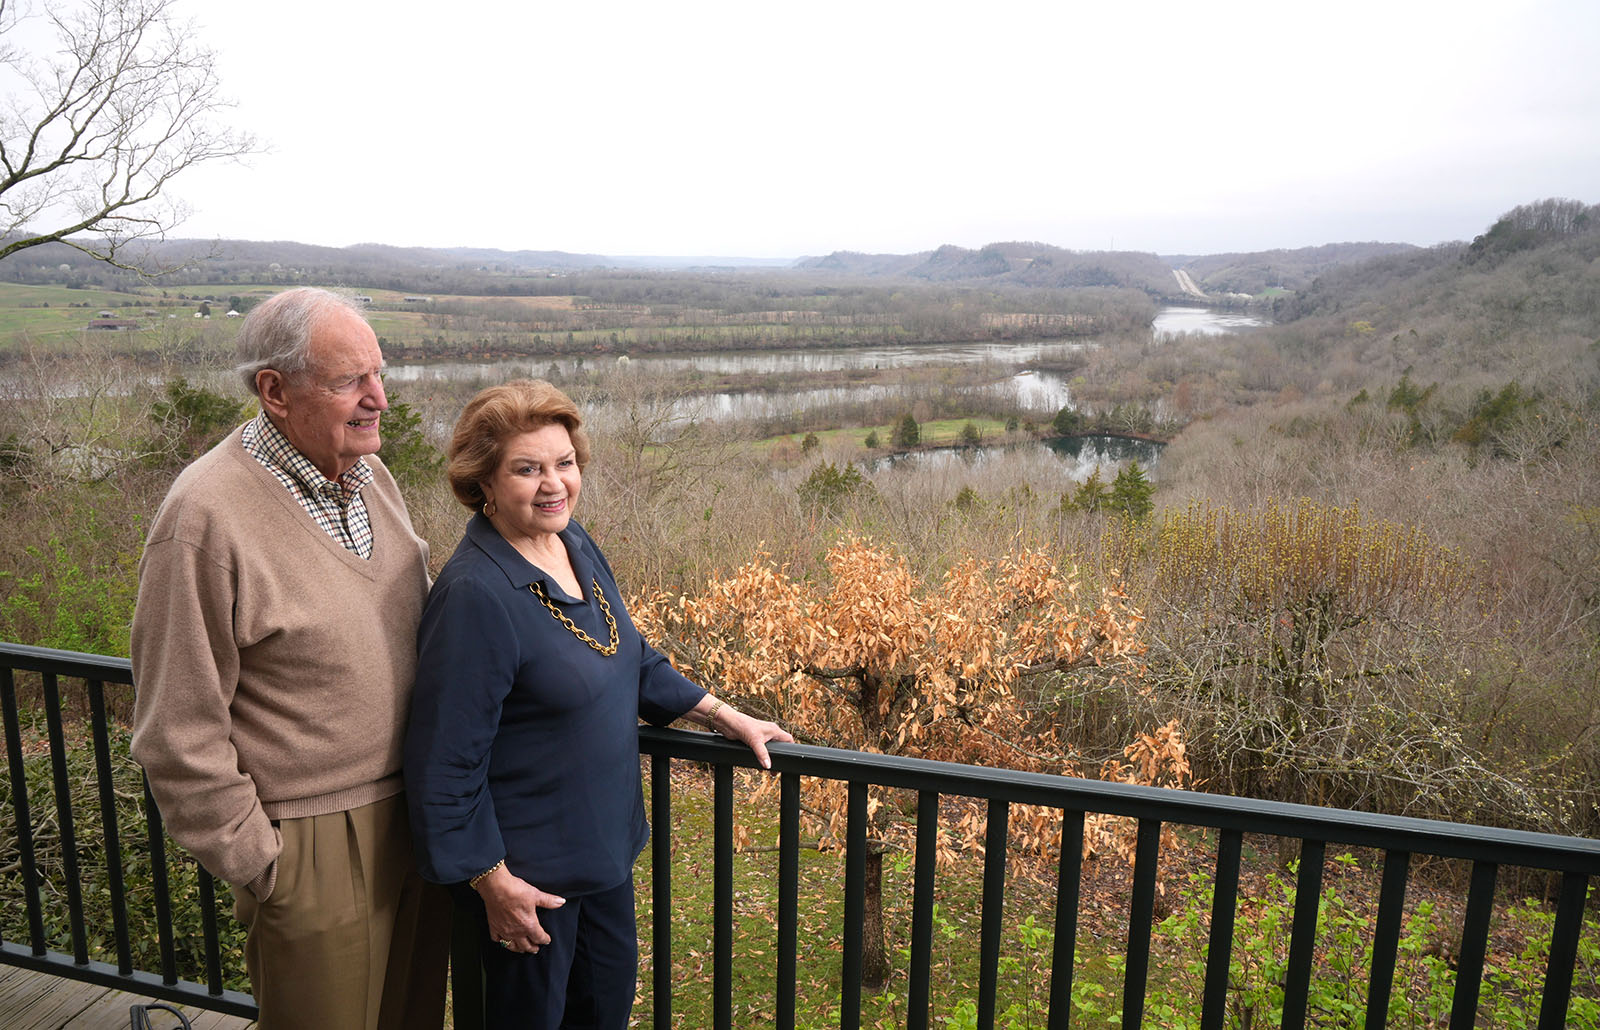 Bill and Jane Coble standing on a balcony overlooking their farm in Bells Bend in Davison County.